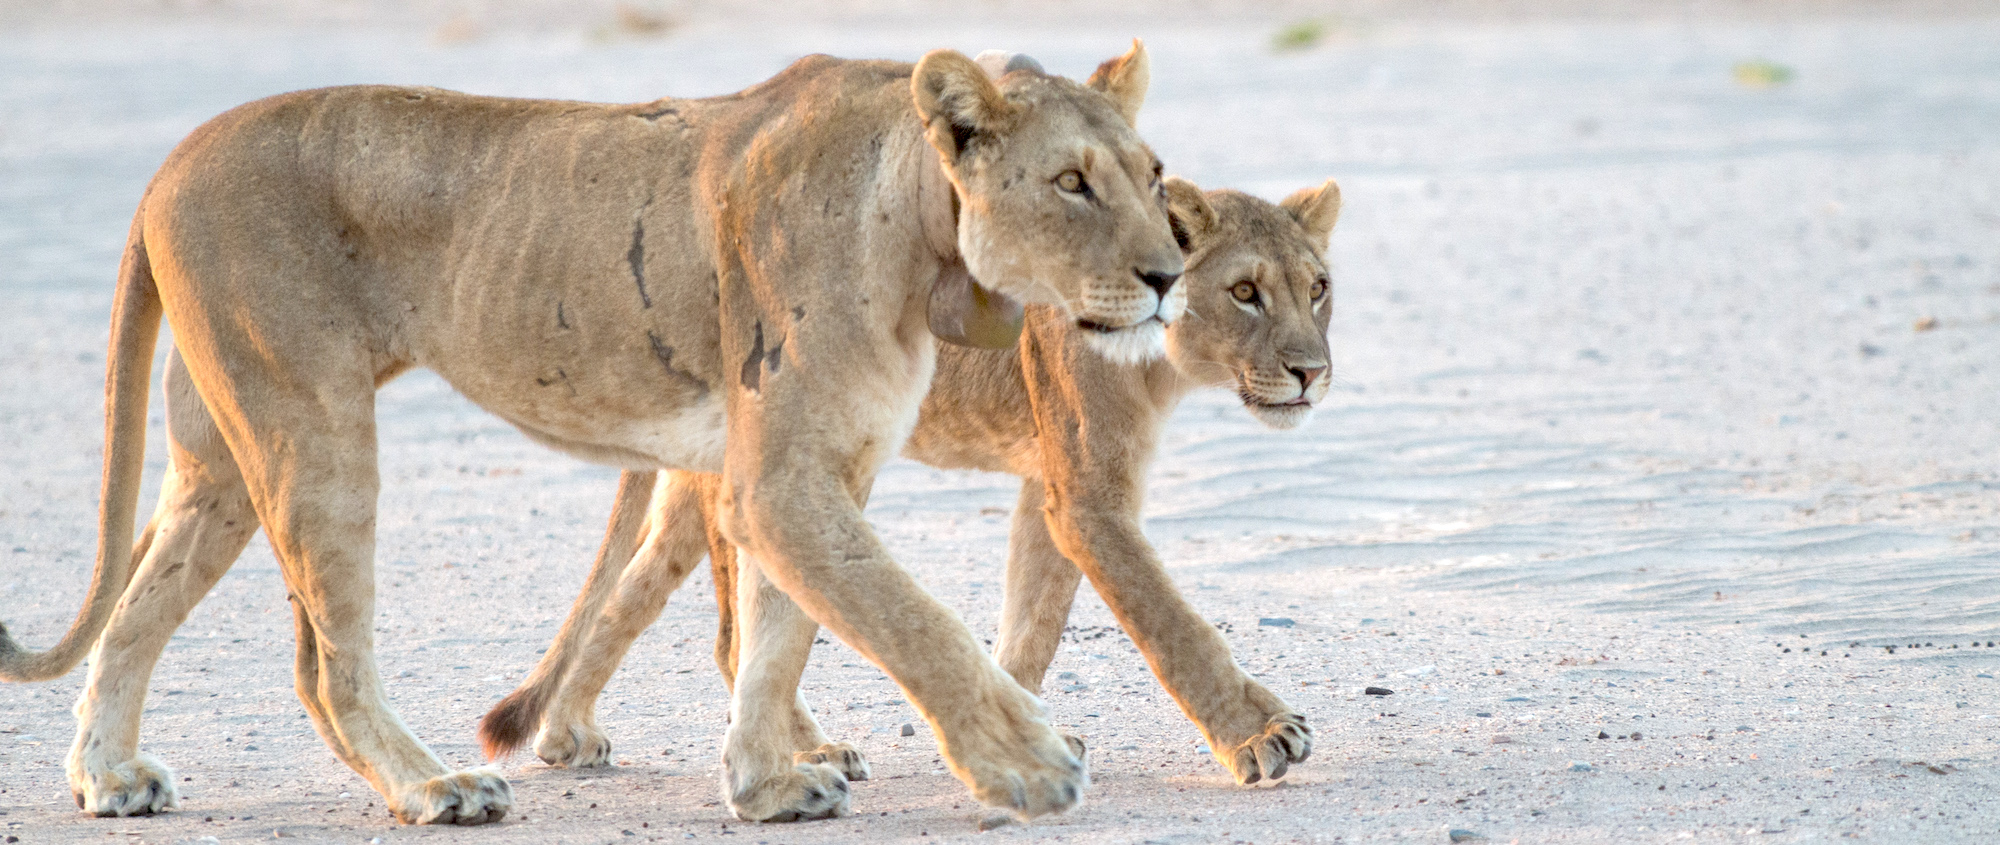 Two Namibian lions